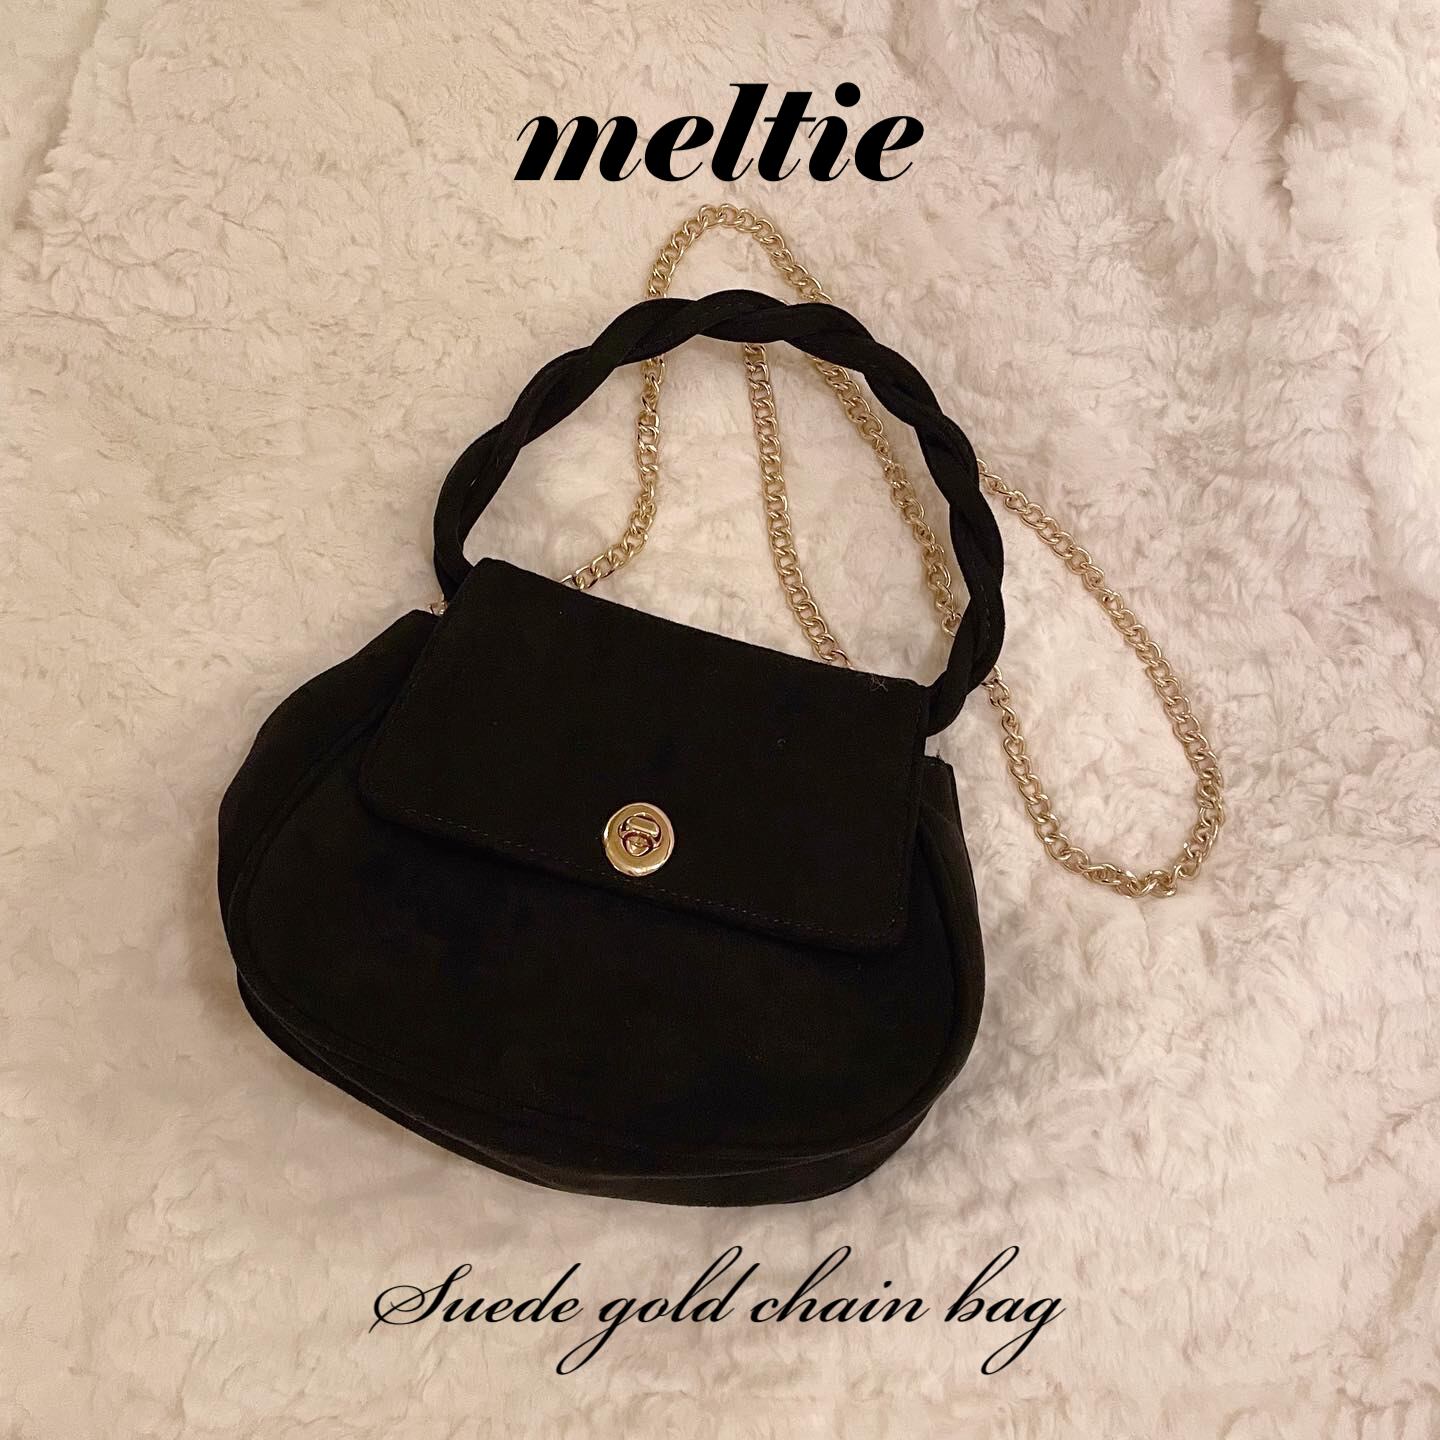 suede gold chain bag